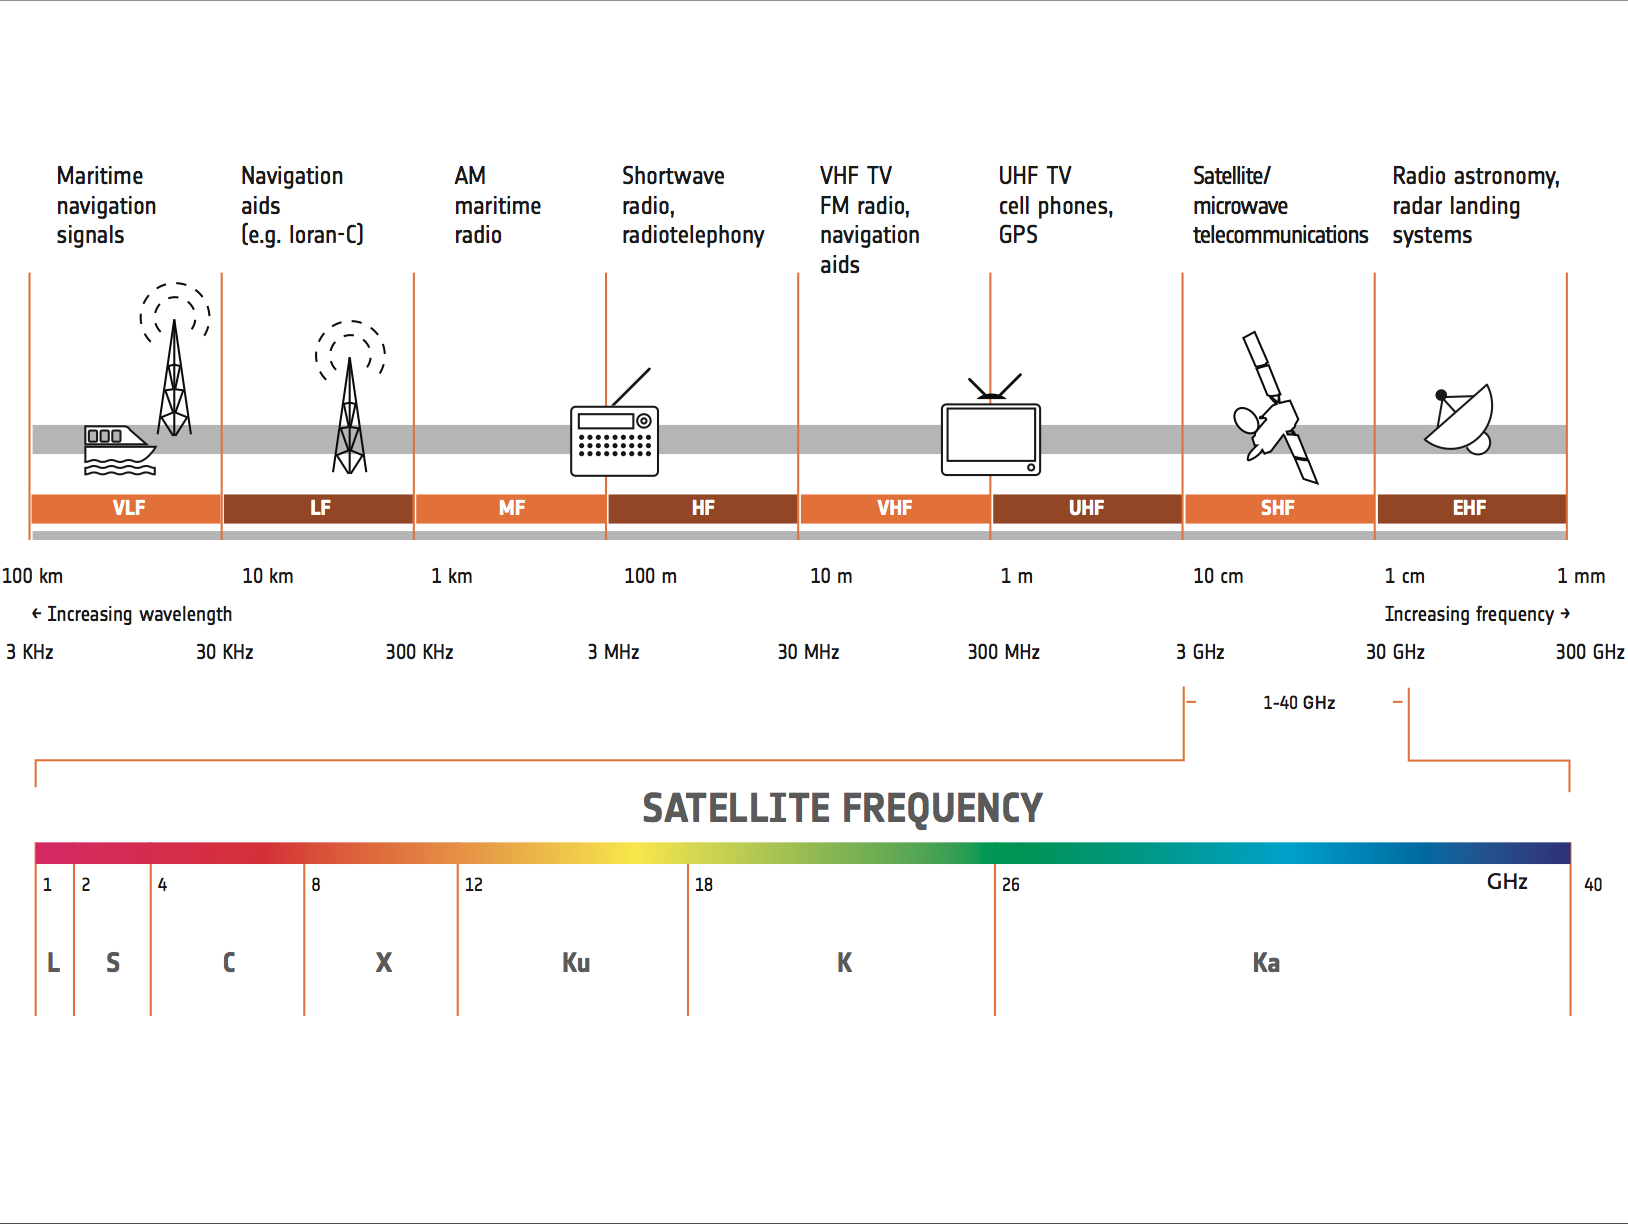 What are satellite channel frequencies?